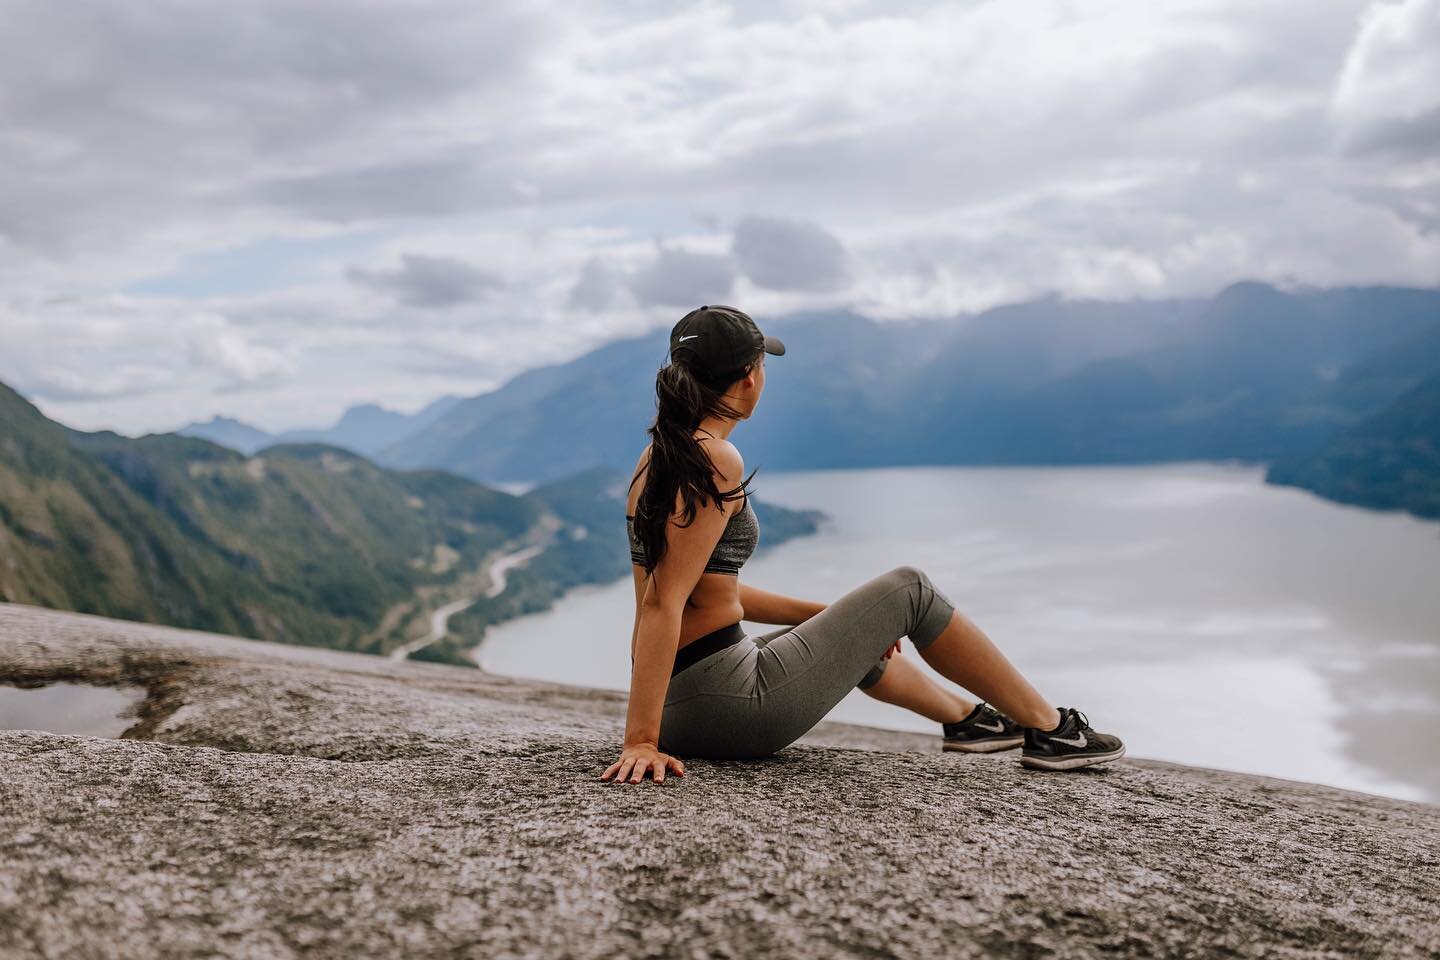 Do yourself a favour and go check out @drew.gonsalves / @lumii.studio ✨

I met Drew in Squamish through a mutual friend of ours. We hiked! We took photos! And we did not realize it would be FAR too long before getting to do these things with these pe